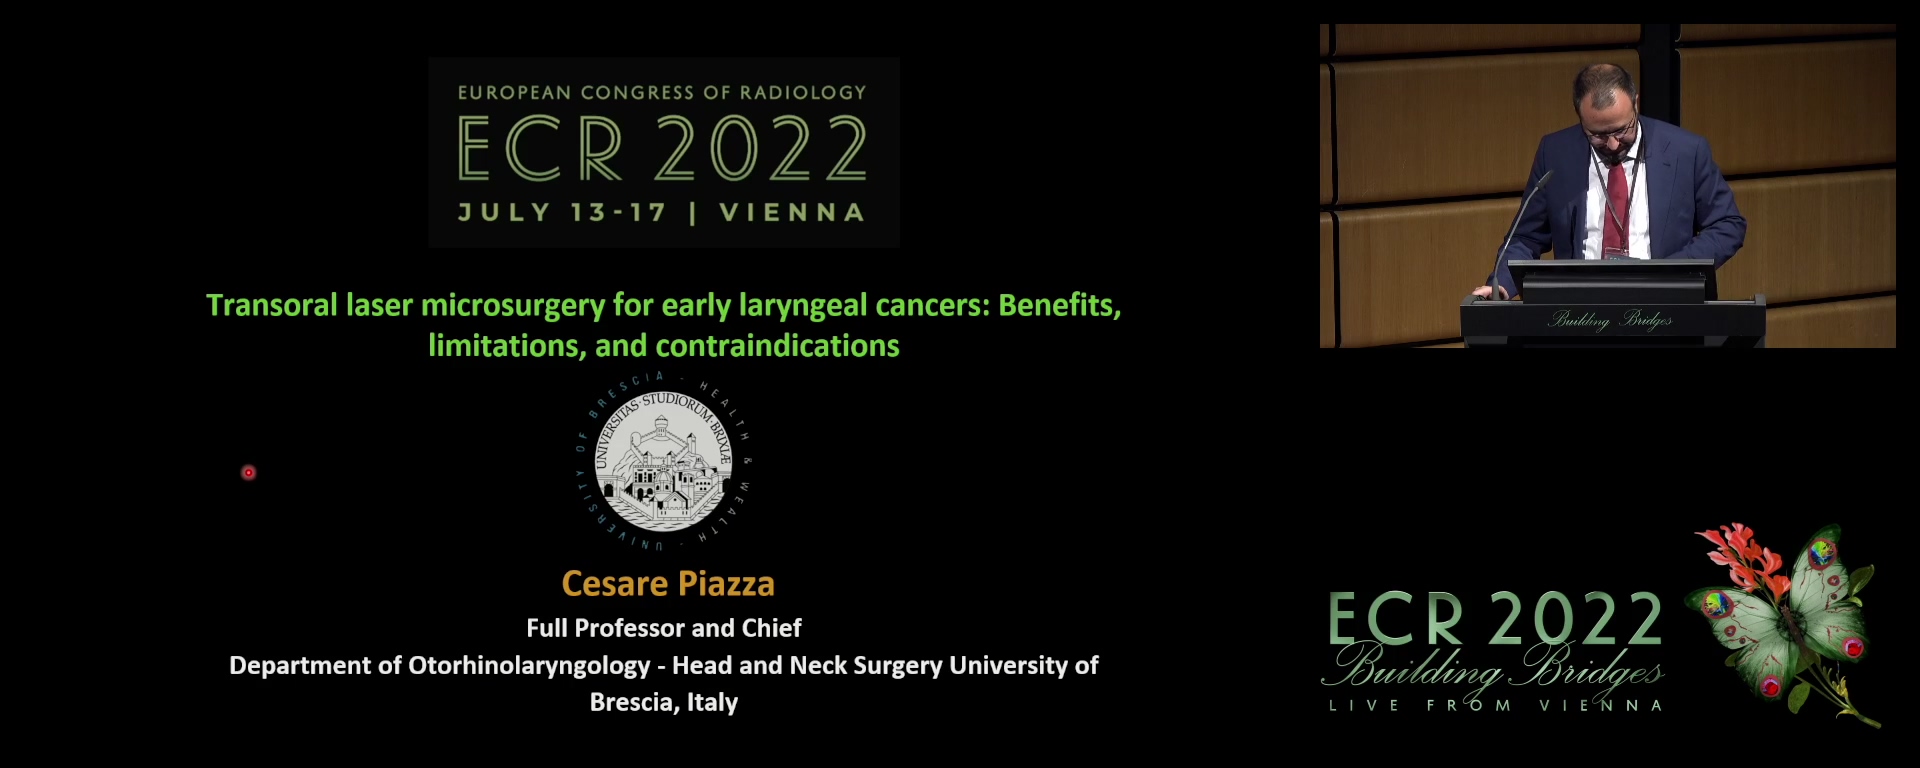 Transoral microsurgery in early laryngeal cancers: benefits, limitations, and contraindications